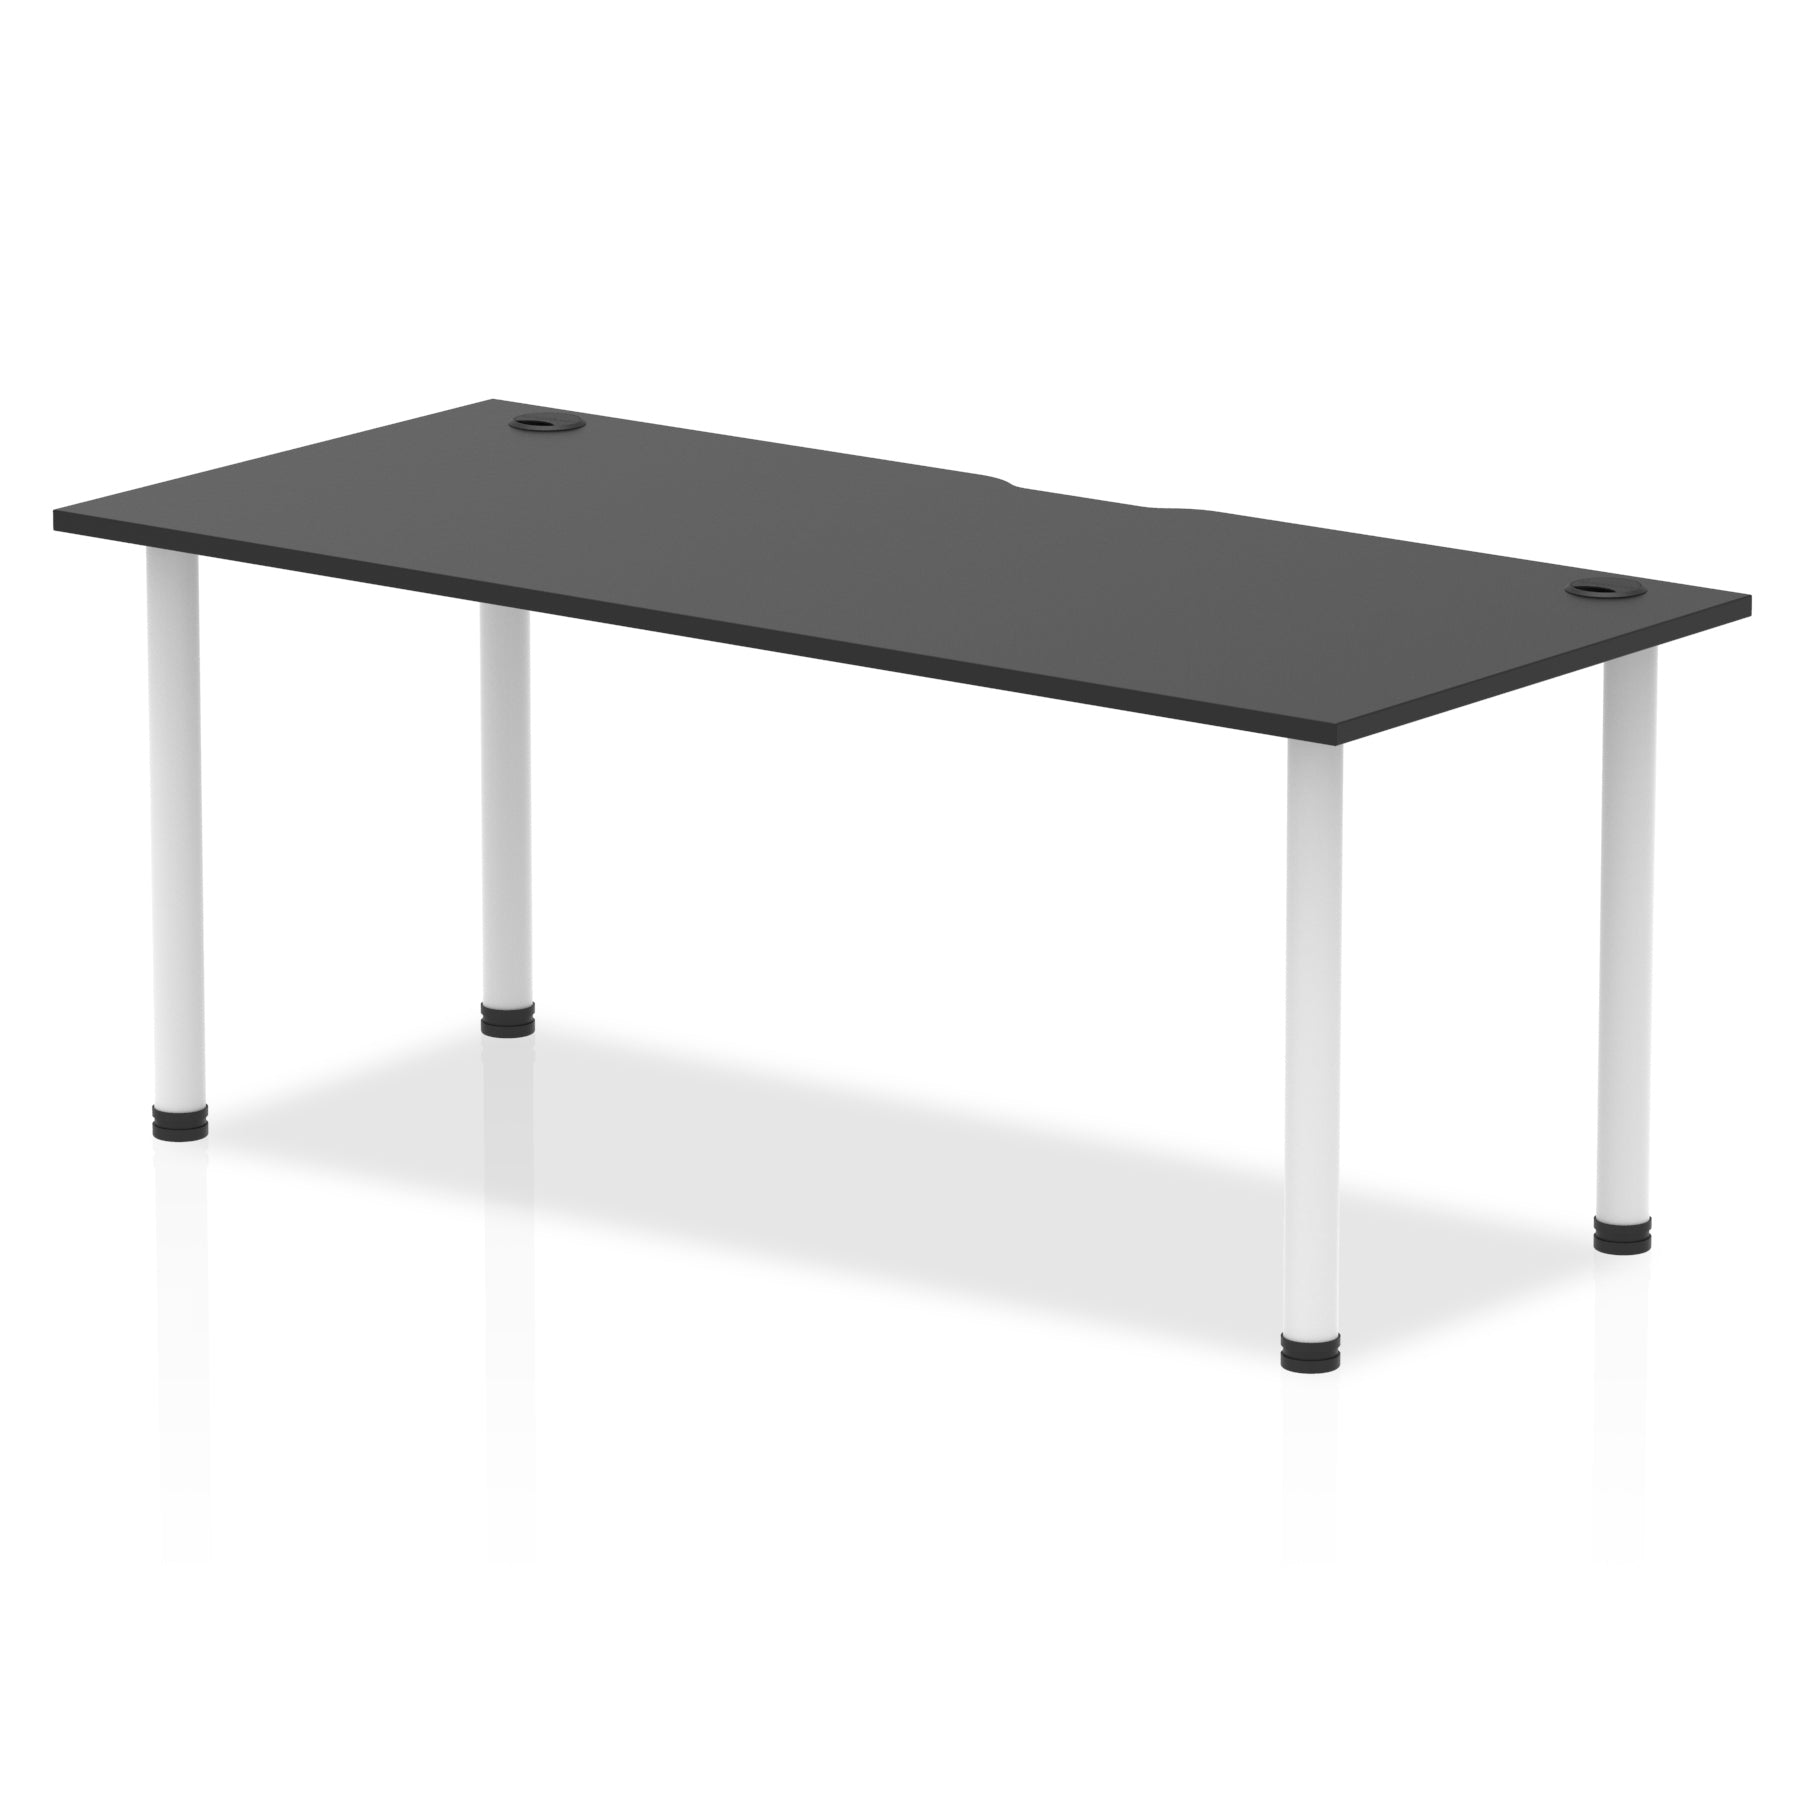 Impulse Black Series Straight Table - Rectangular MFC Desk, 1200-1800mm Width, 5-Year Guarantee, Self-Assembly, Multiple Frame Colors & Sizes